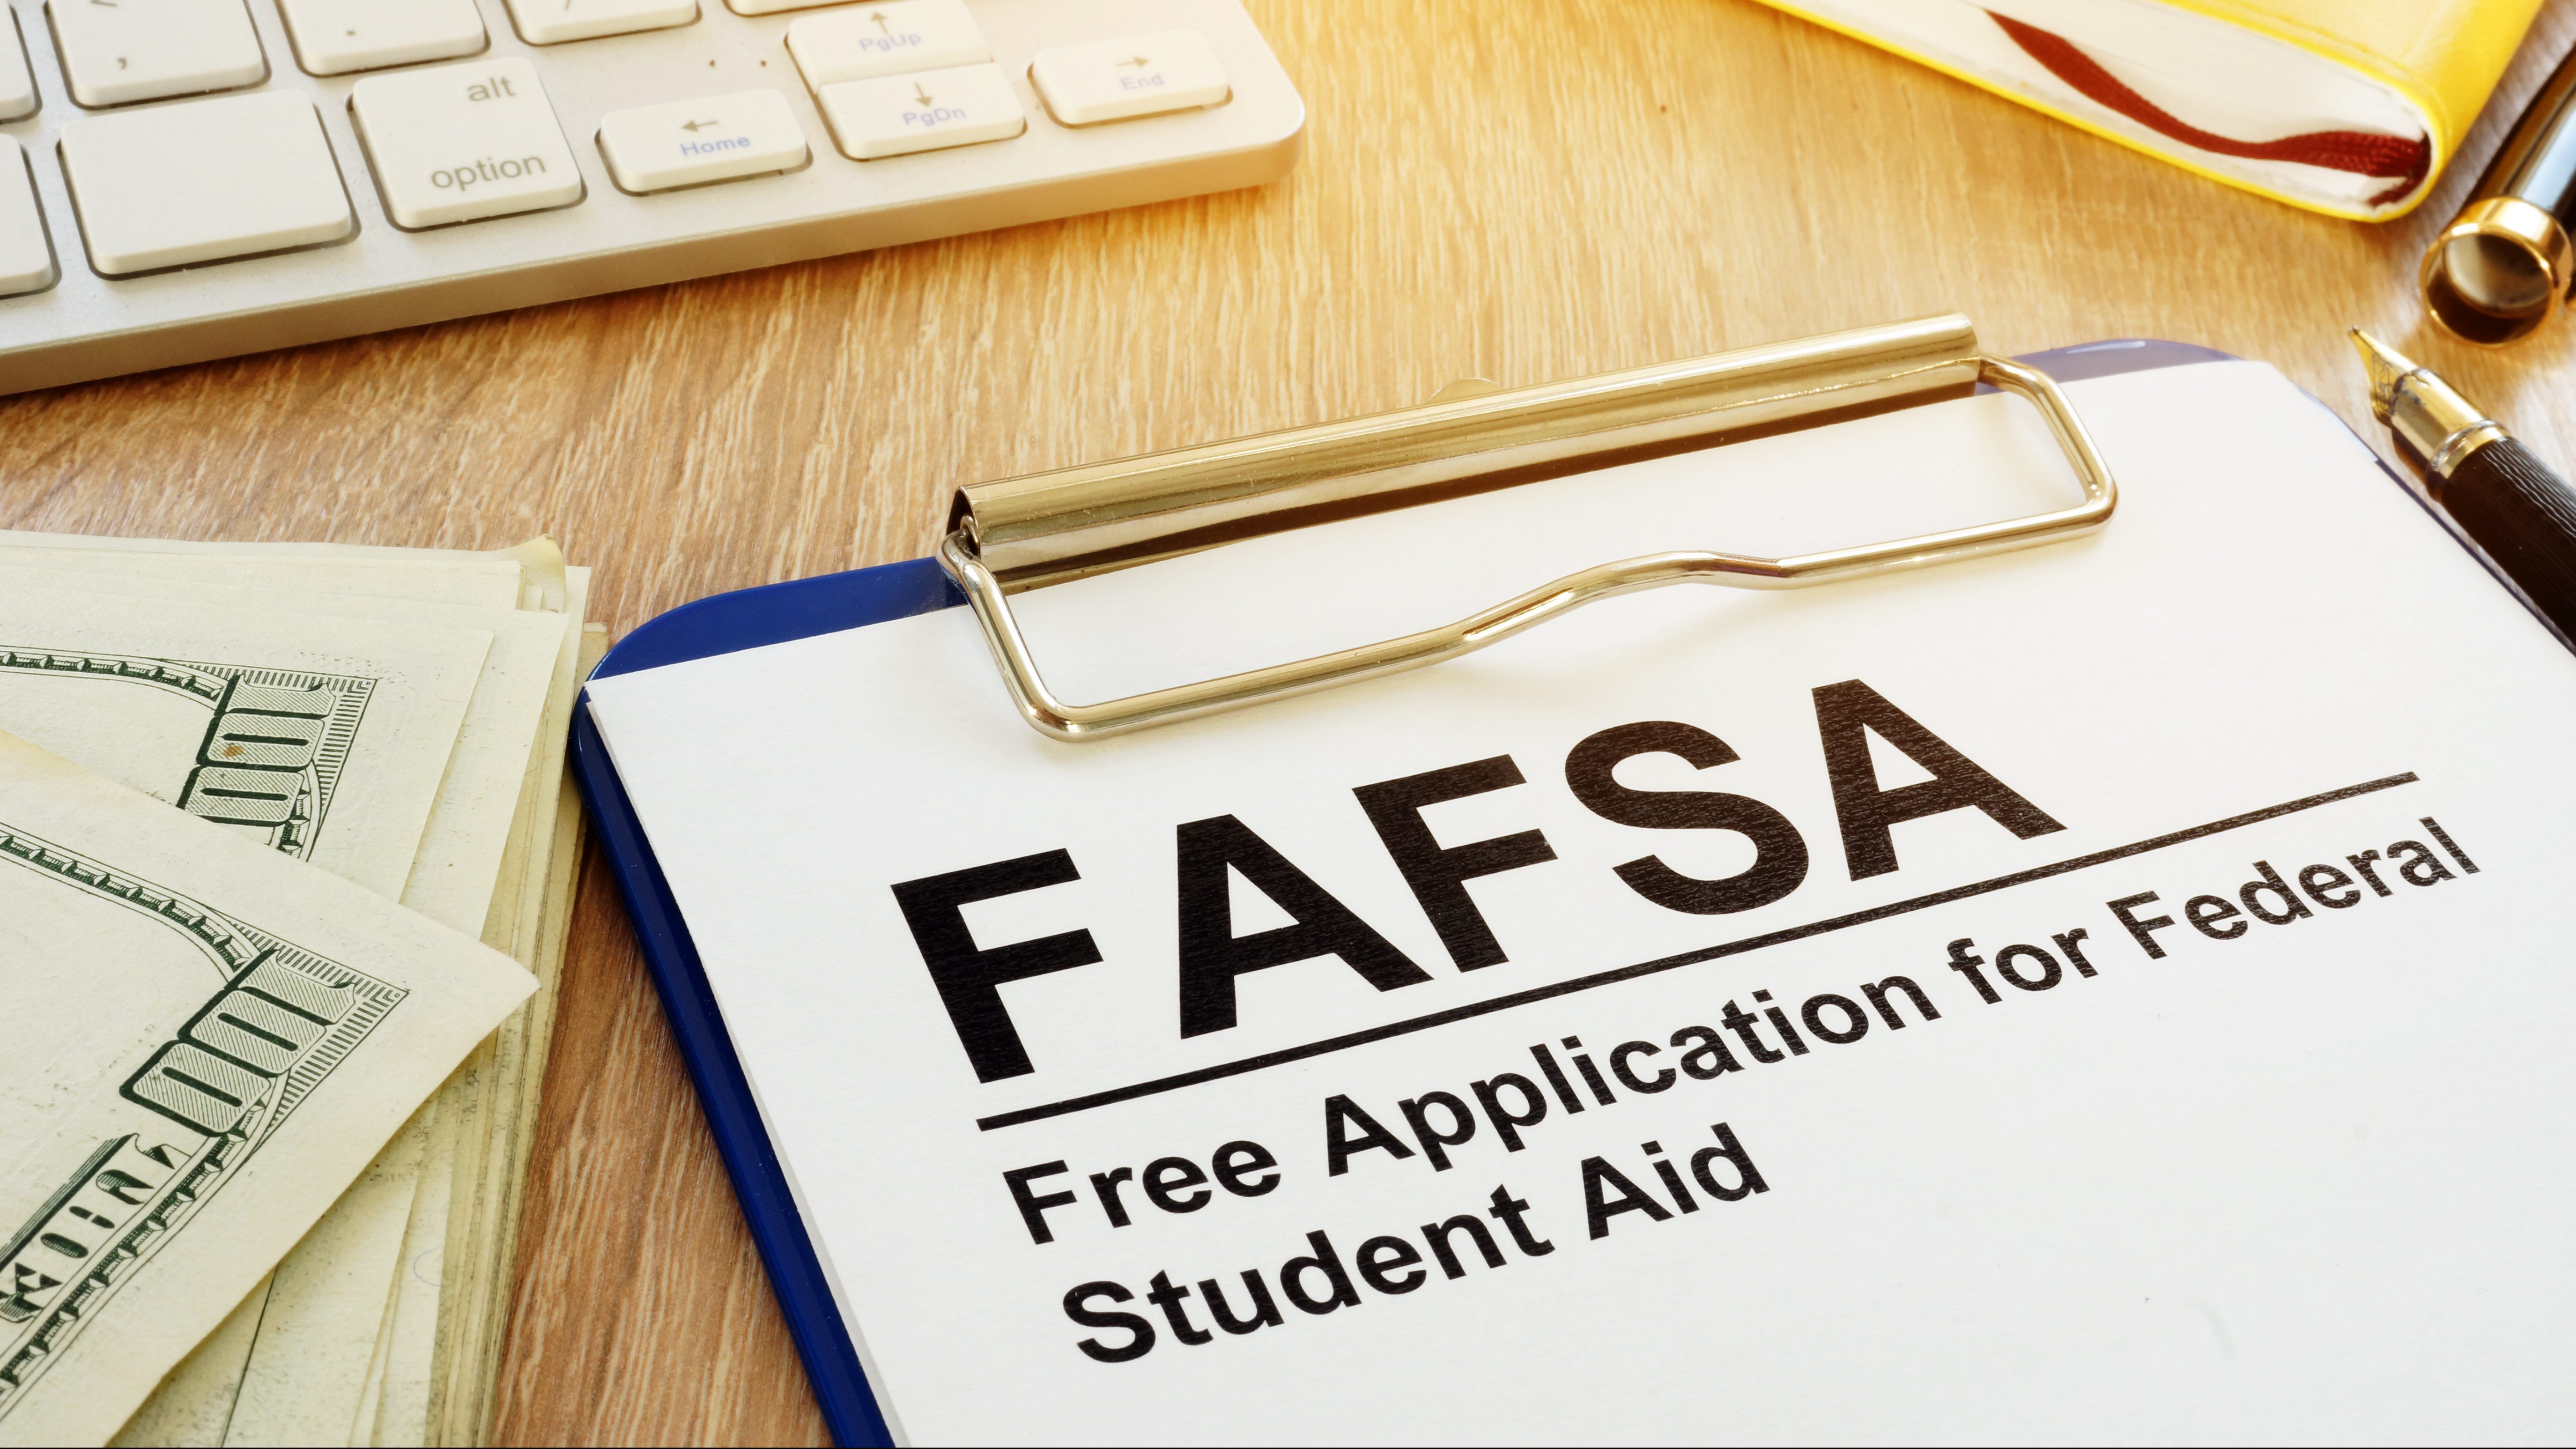 Millions of high schoolers neglect FAFSA — missing out on billions in aid